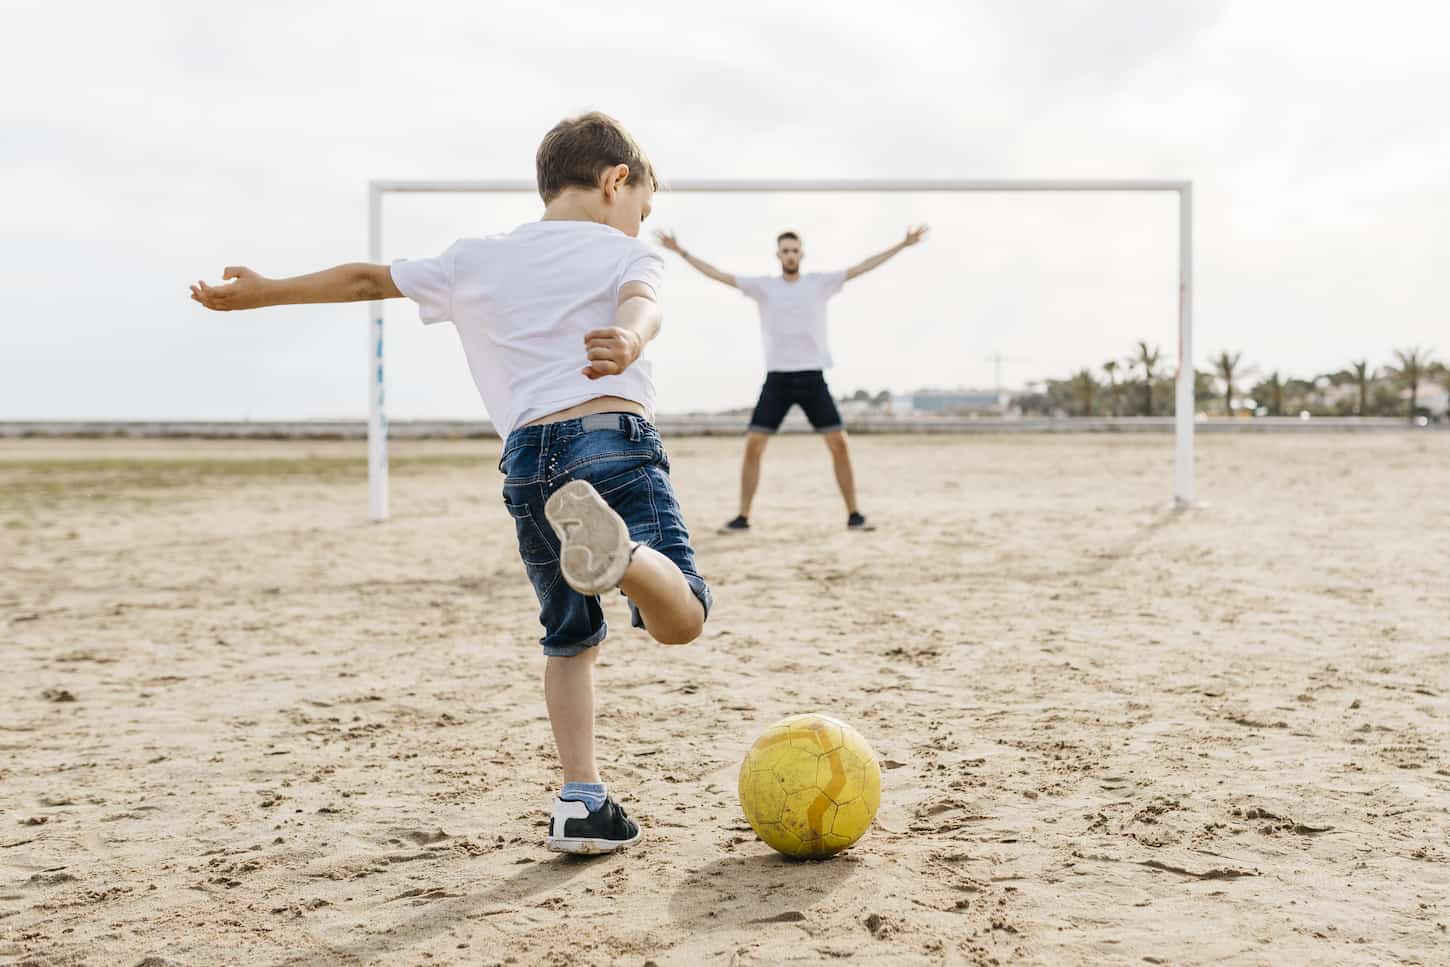 An image of a Man and boy playing soccer on the beach.